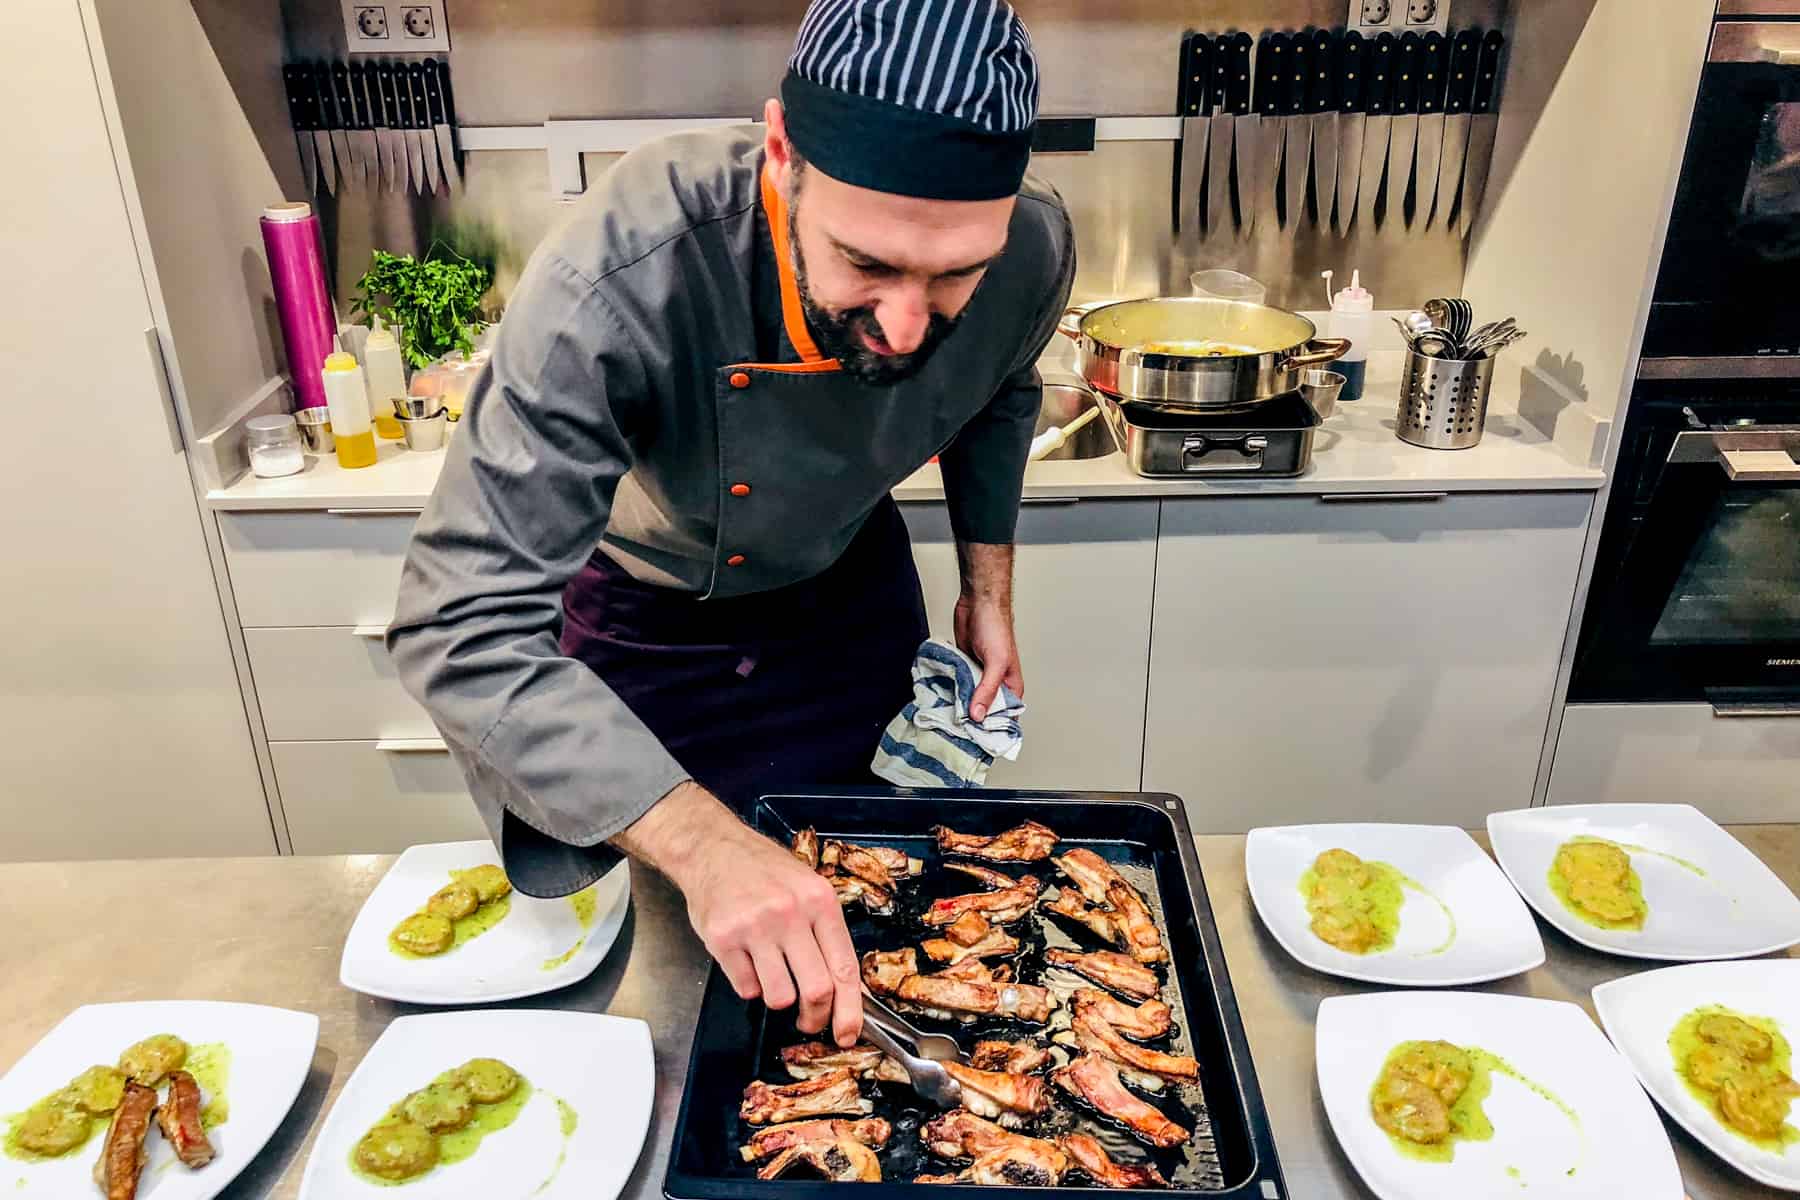 A man in a blue and white stripped hat and grey and orange chef's overalls, picks up grilled meat from a black tray, ready to place on the white plates featuring a green sauce. 